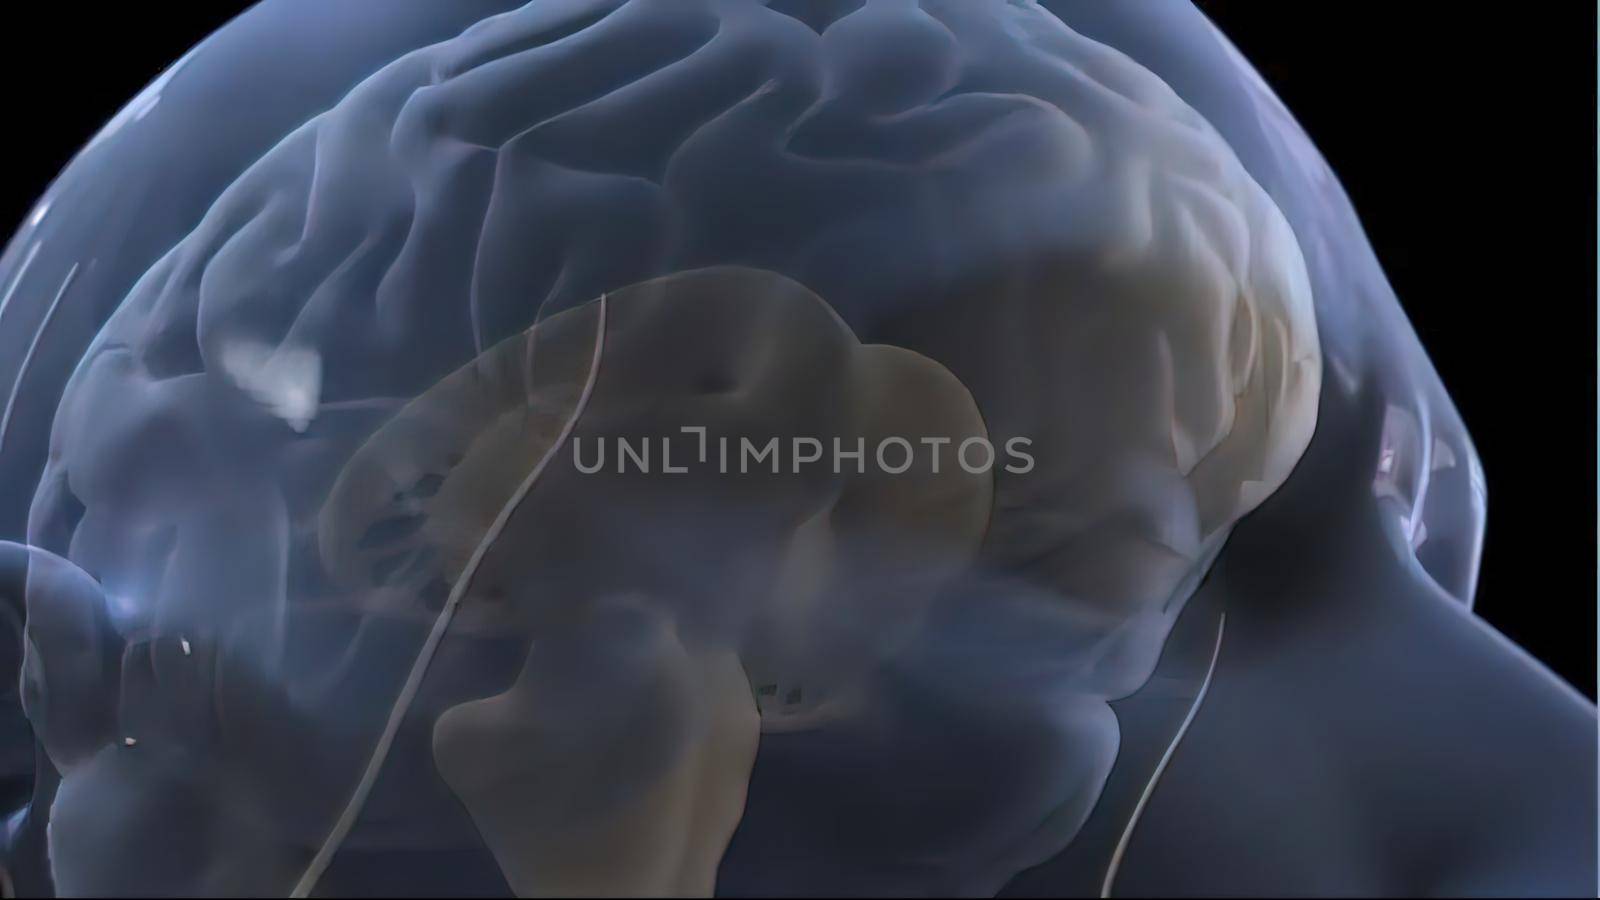 Neurons Transmit Messages In The Brain. Neurons are the cells that pass chemical and electrical signals along the pathways in the brain. 3d illustration